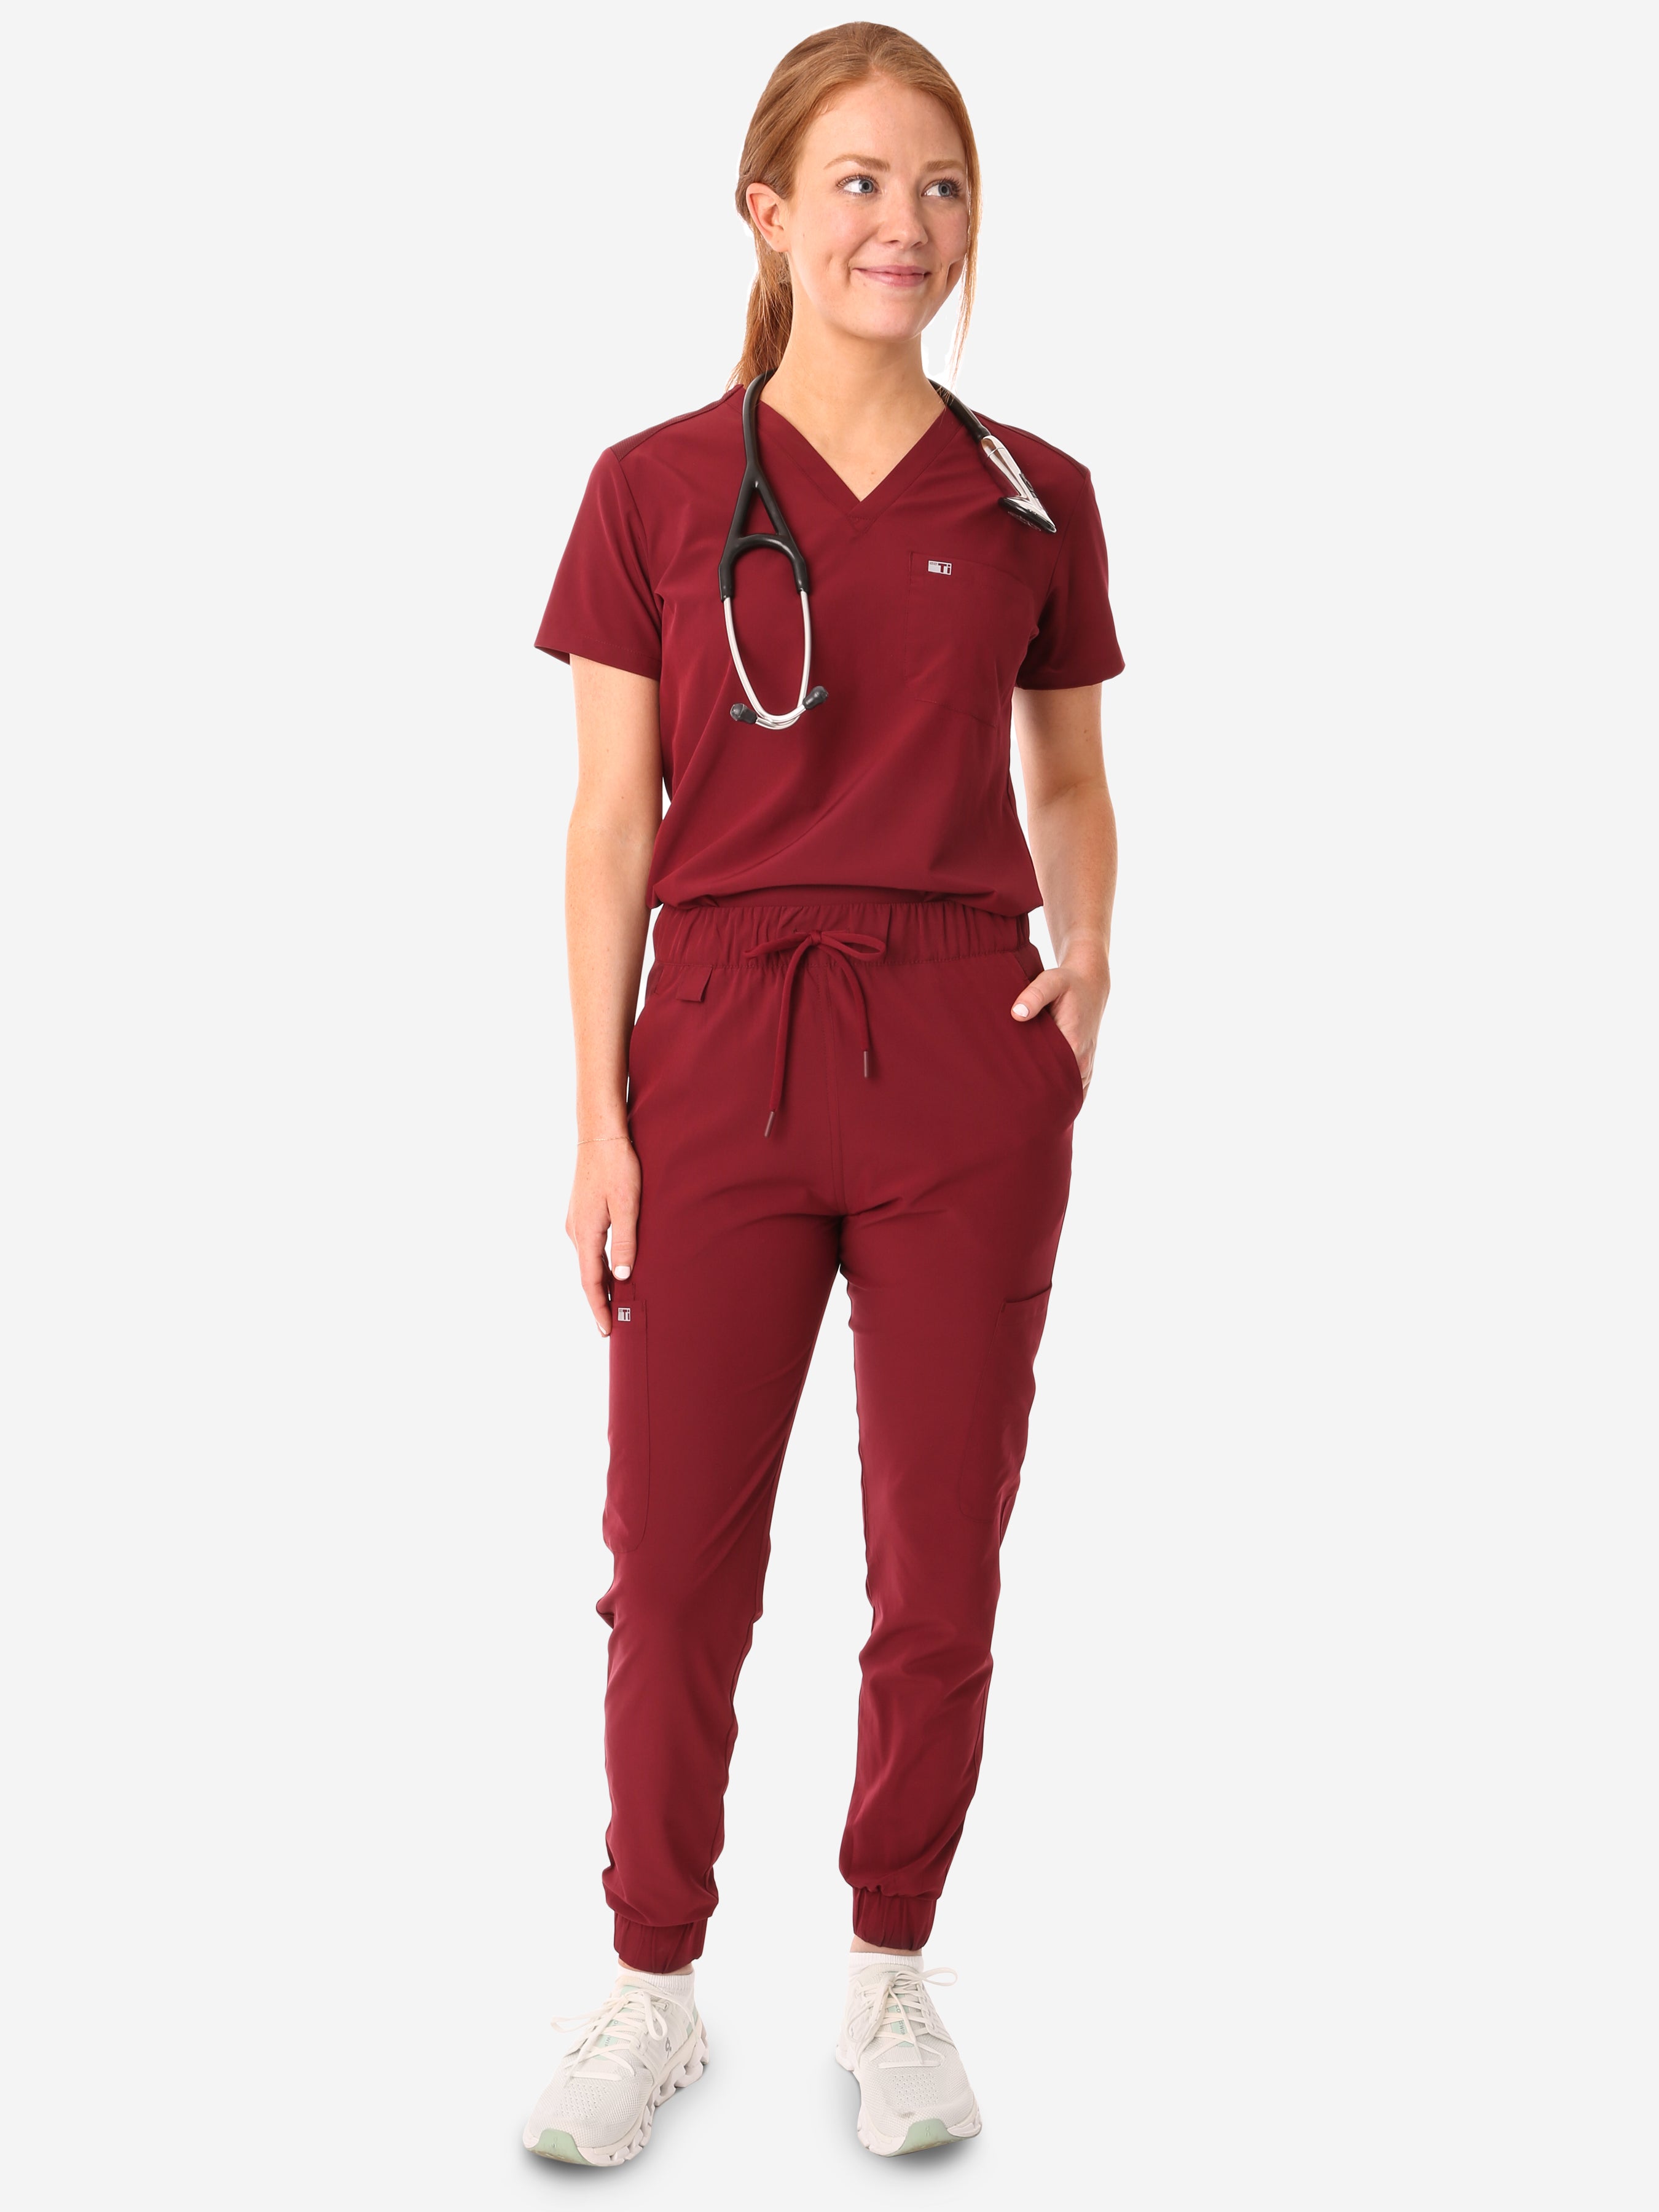 TiScrubs Bold Burgundy Women&#39;s Stretch Perfect Jogger Pants and One-Pocket Tuckable Top Front View Full Body